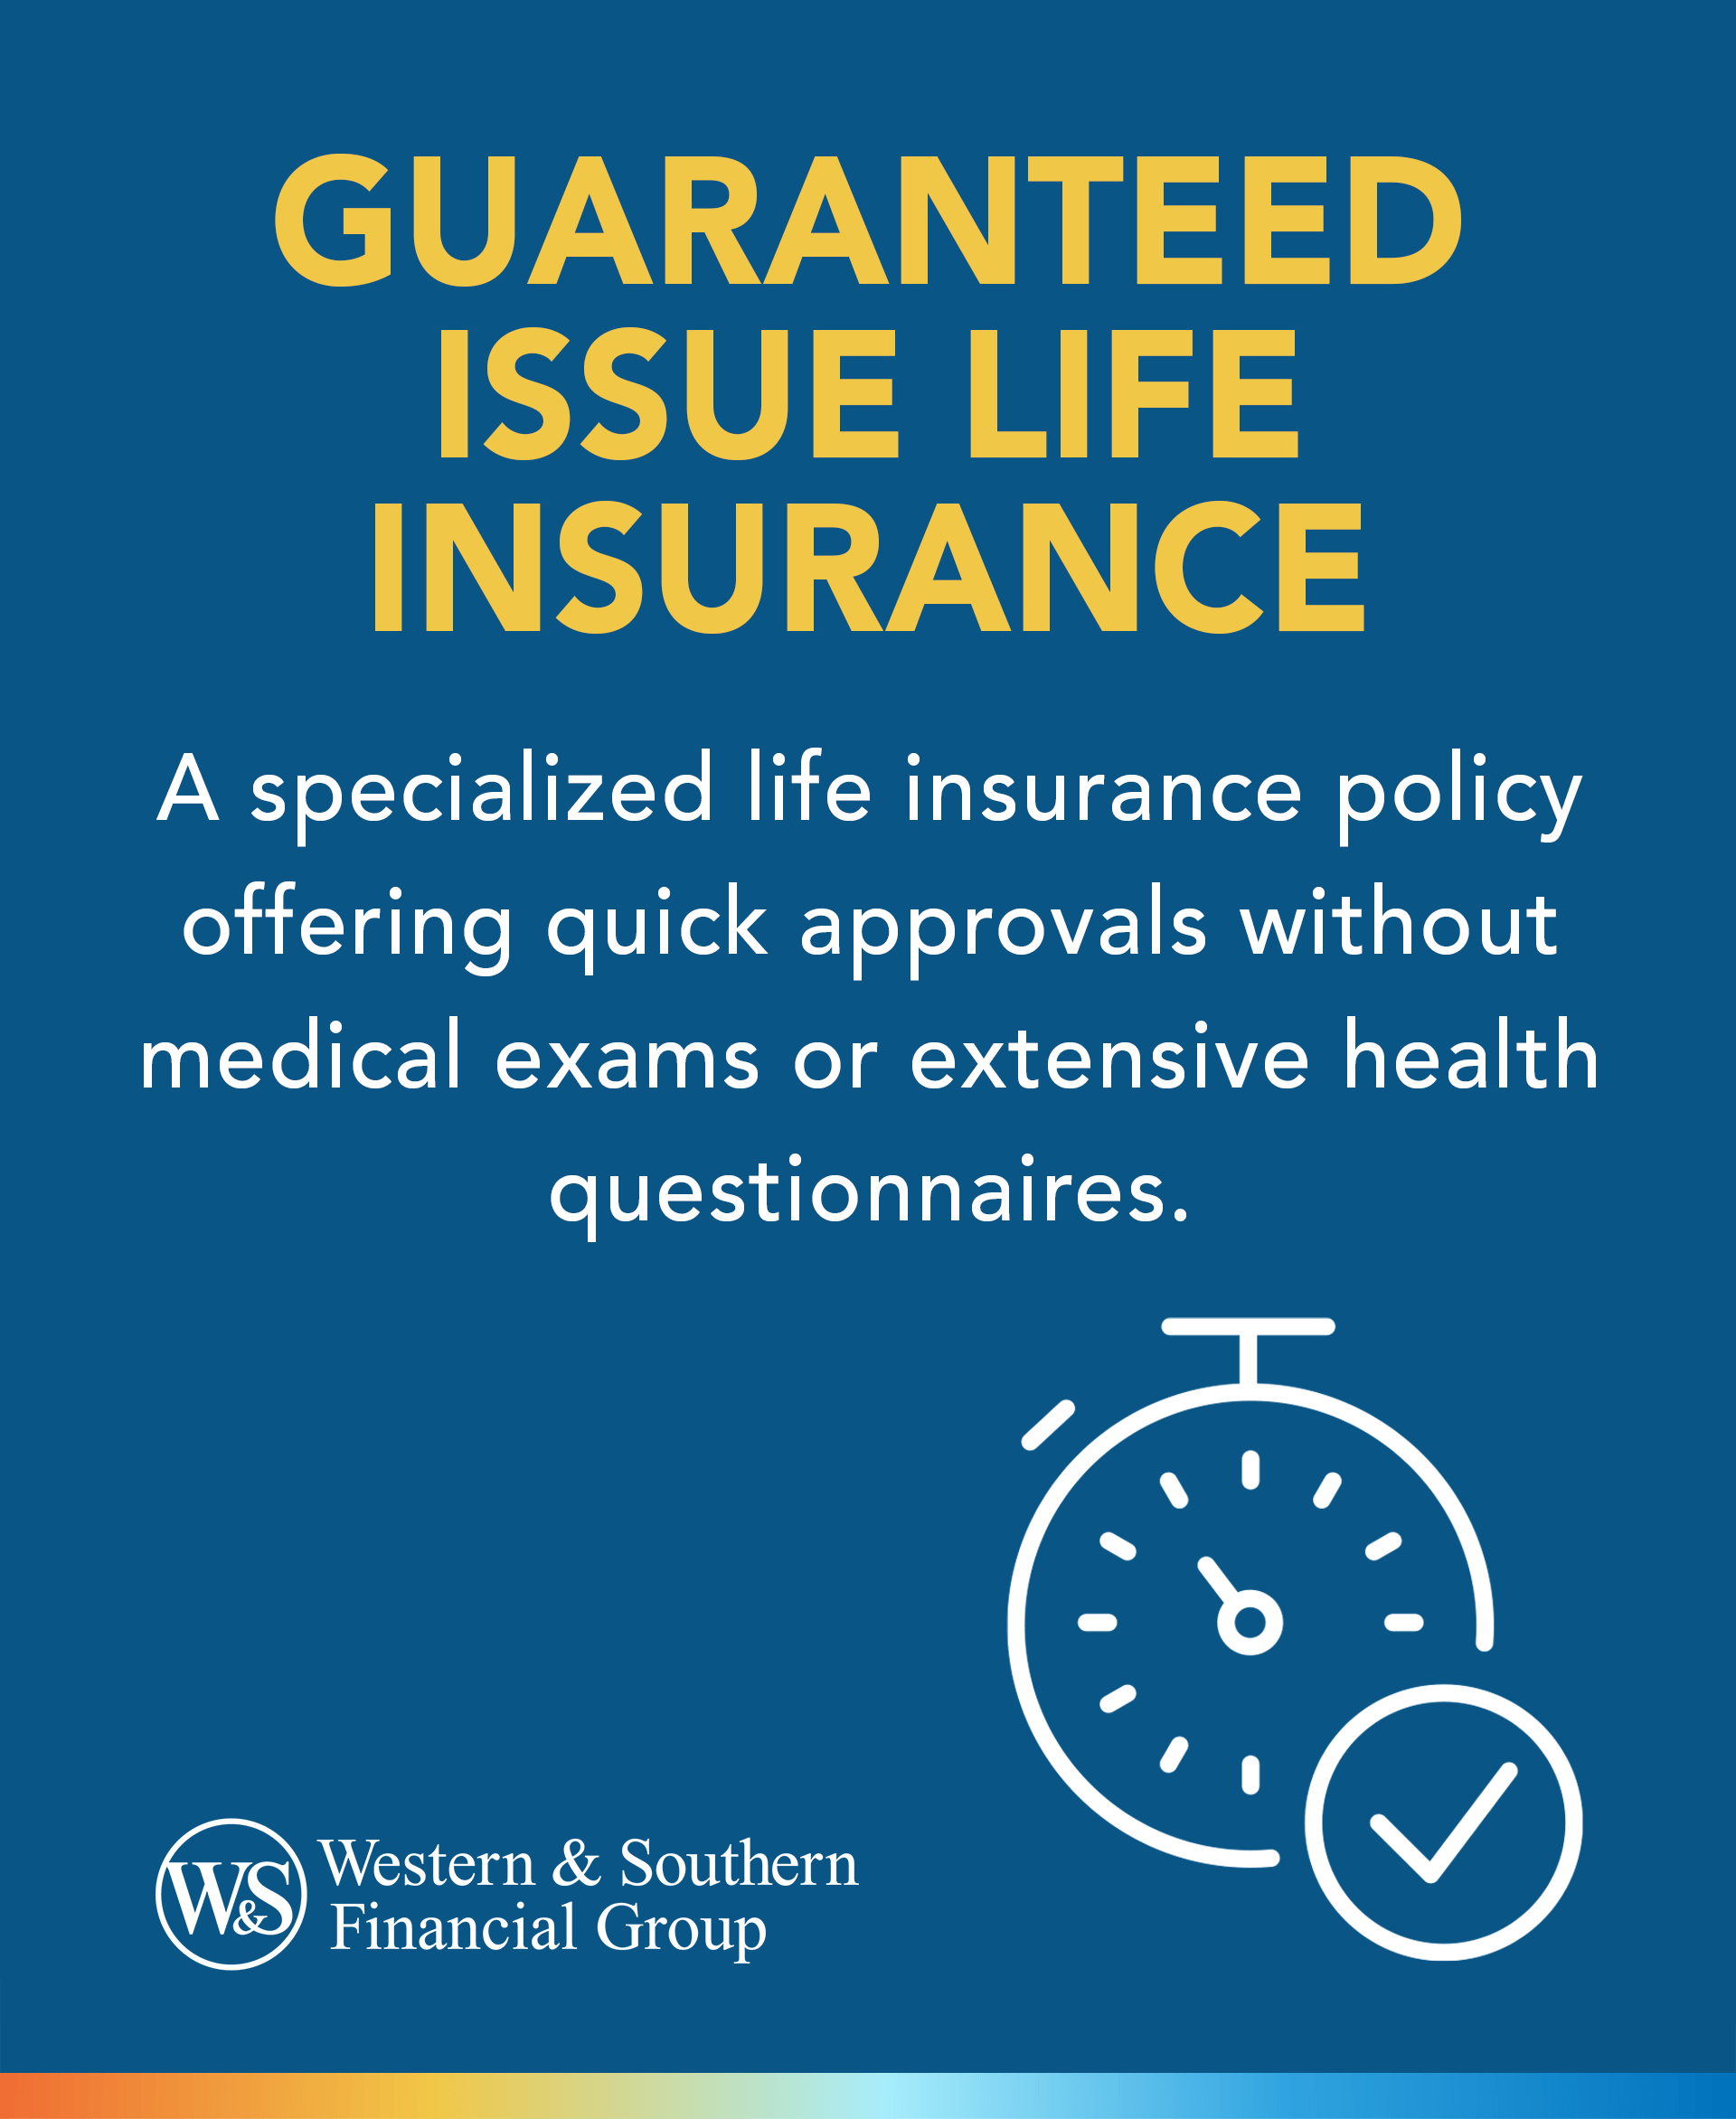 Guaranteed Issue Life Insurance is a specialized life insurance policy offering quick approvals without medical exams or extensive health questionnaires.